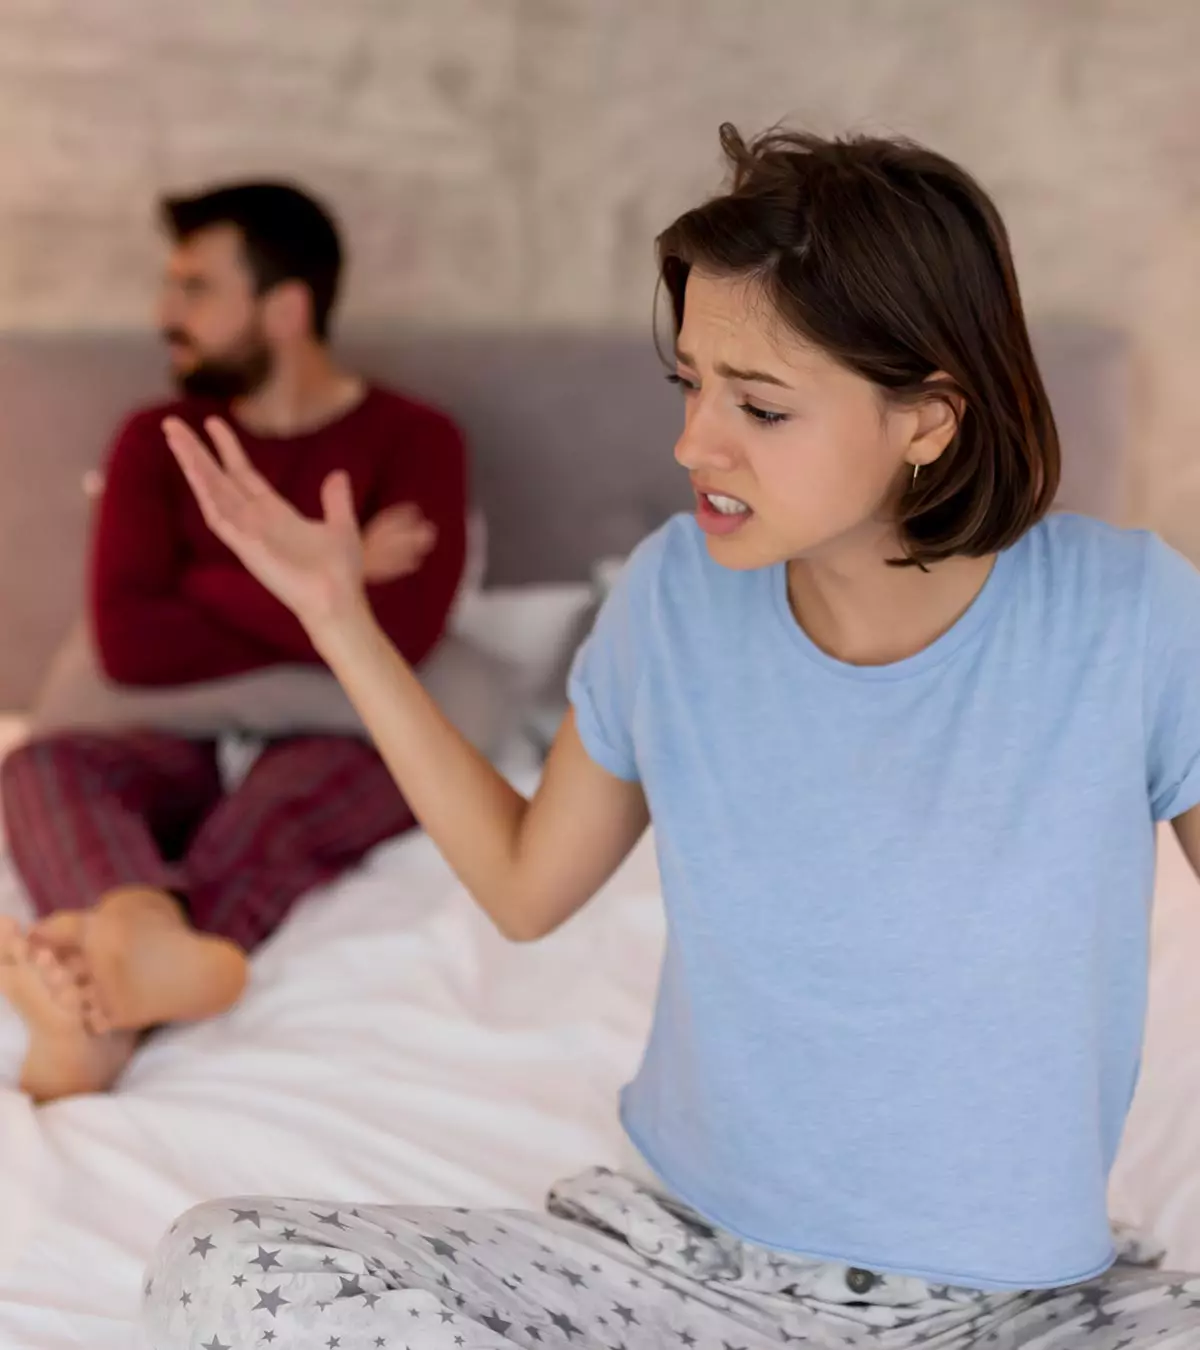 If you disregard your partner and micromanage everything, you might come off as nagging.